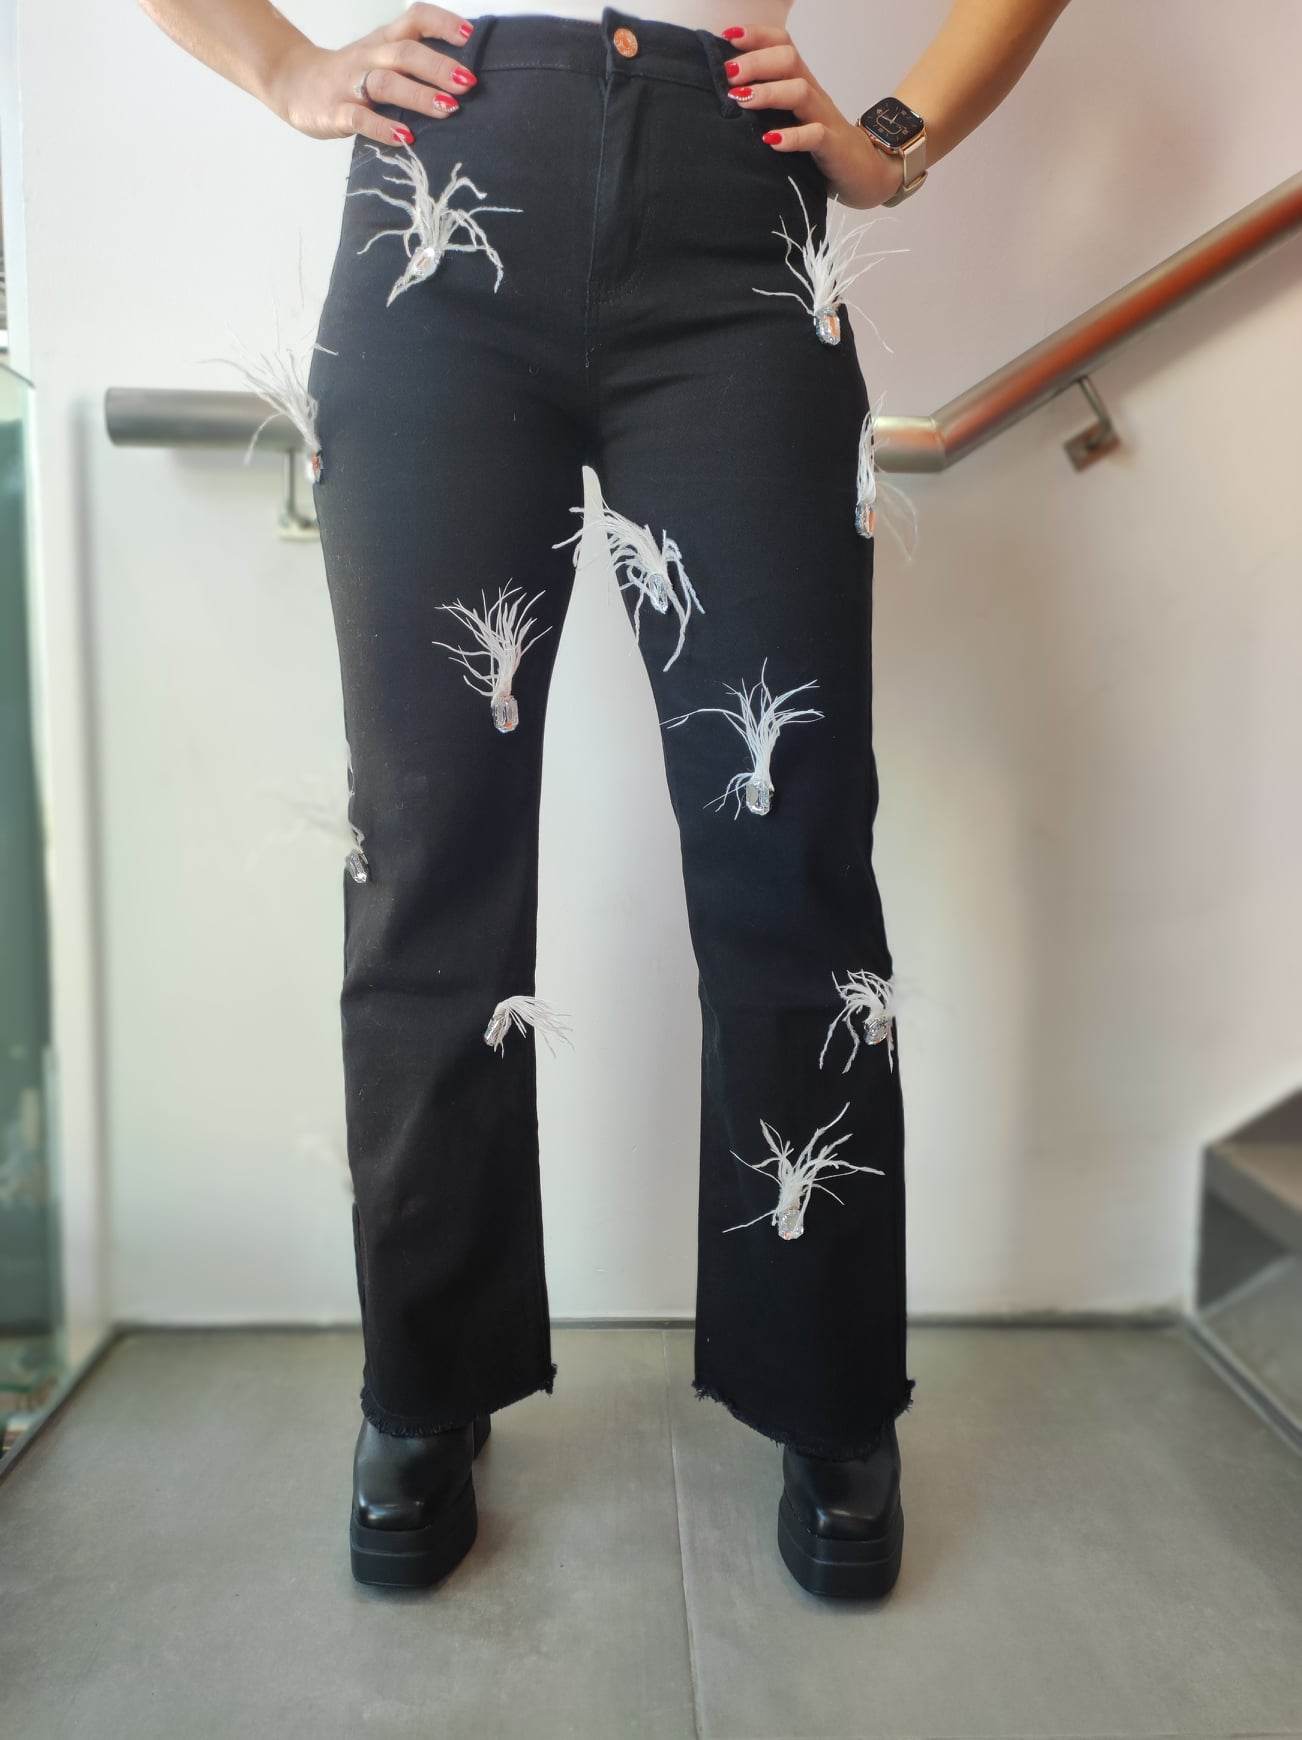 TROUSER MEET TO YOU 22/23 WIDE LEG JEANS WITH STONES AND FEATHERS